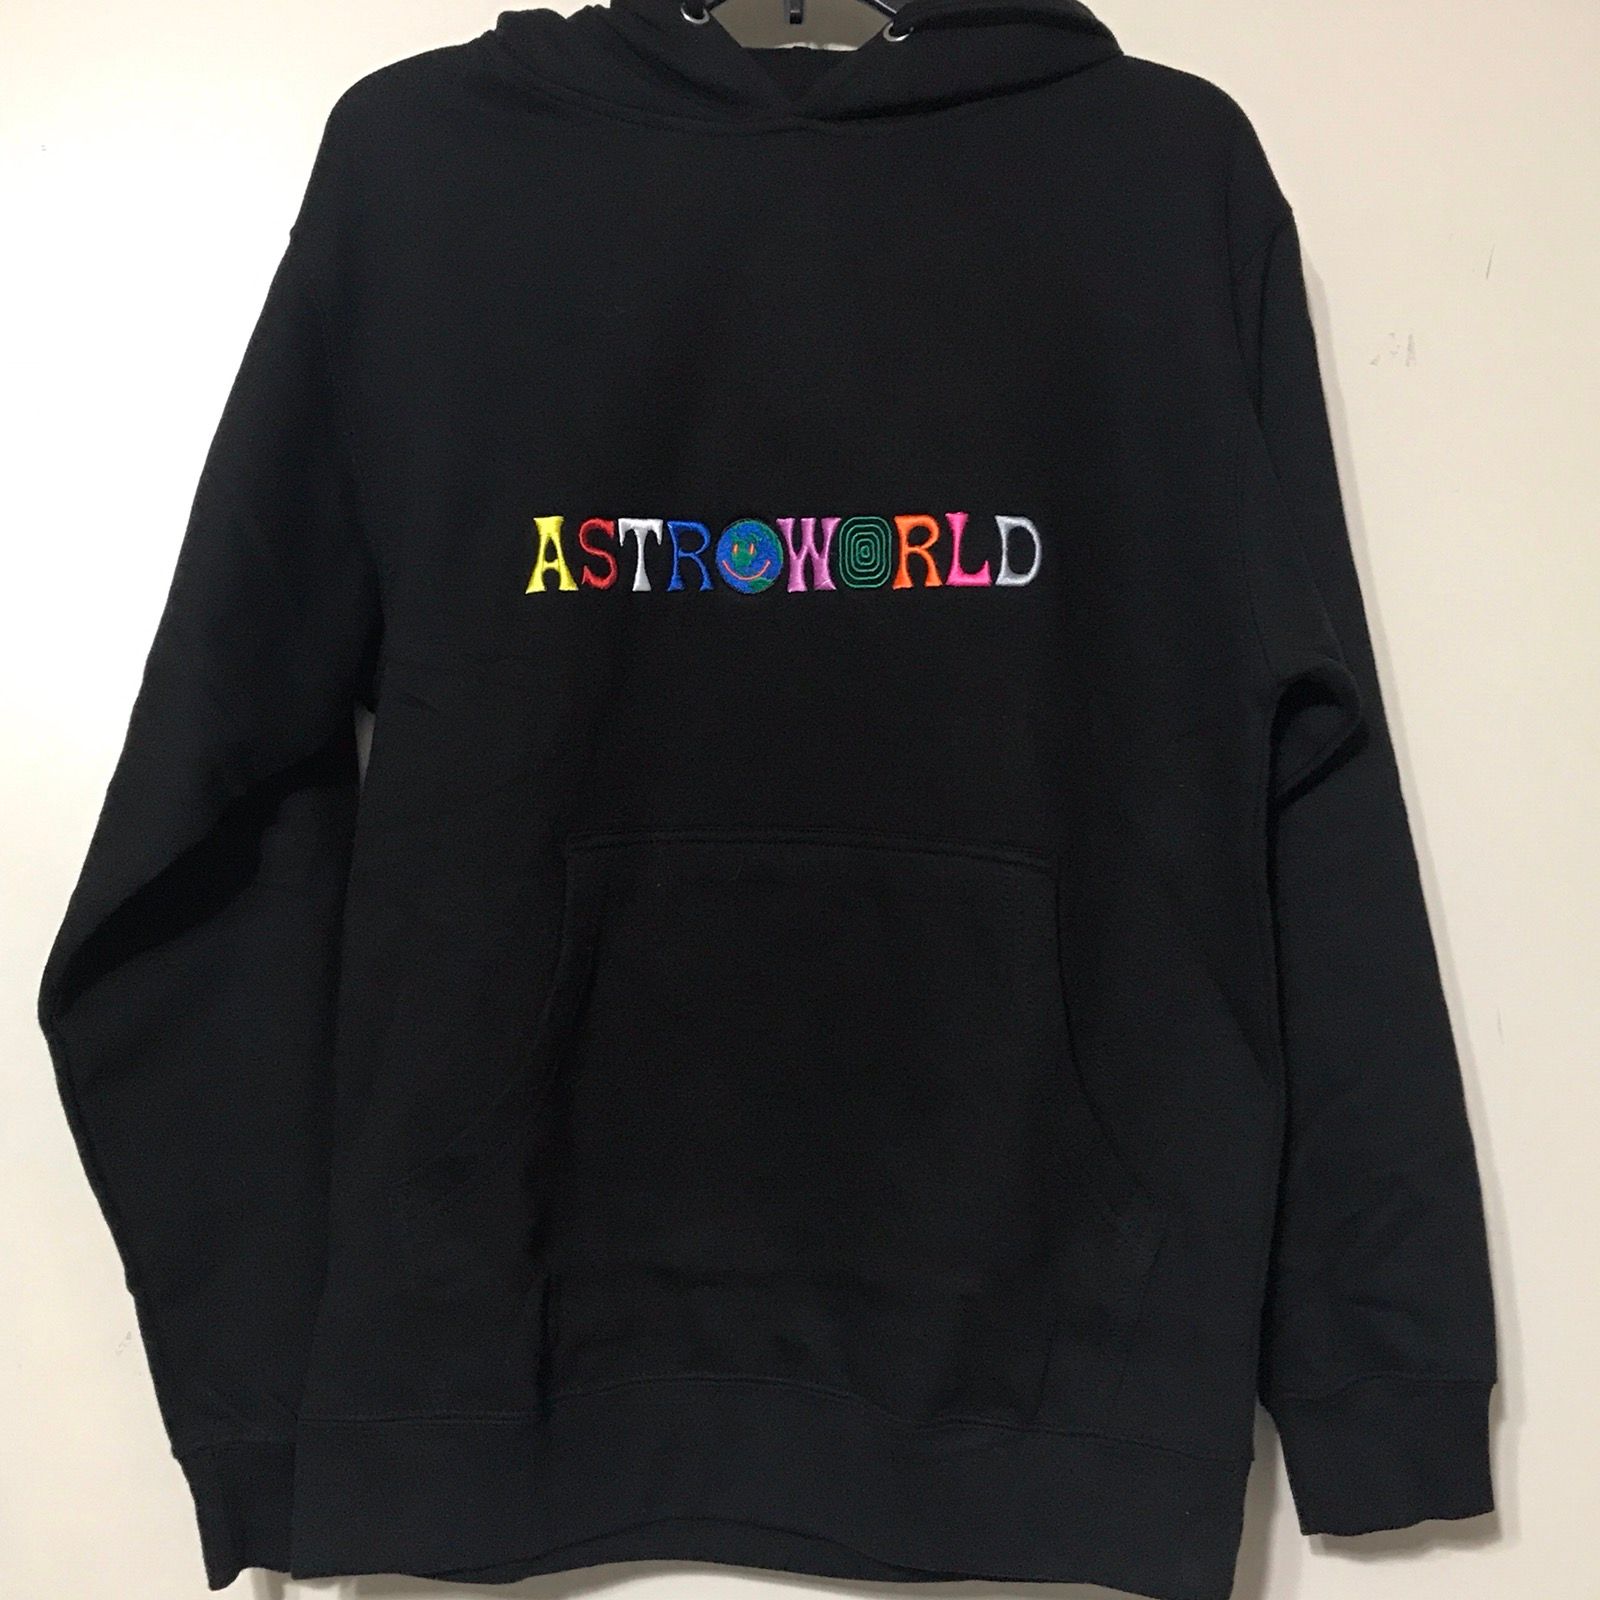 Travis Scott Astroworld Hoodie in Null, Men's (Size Small) Product Image